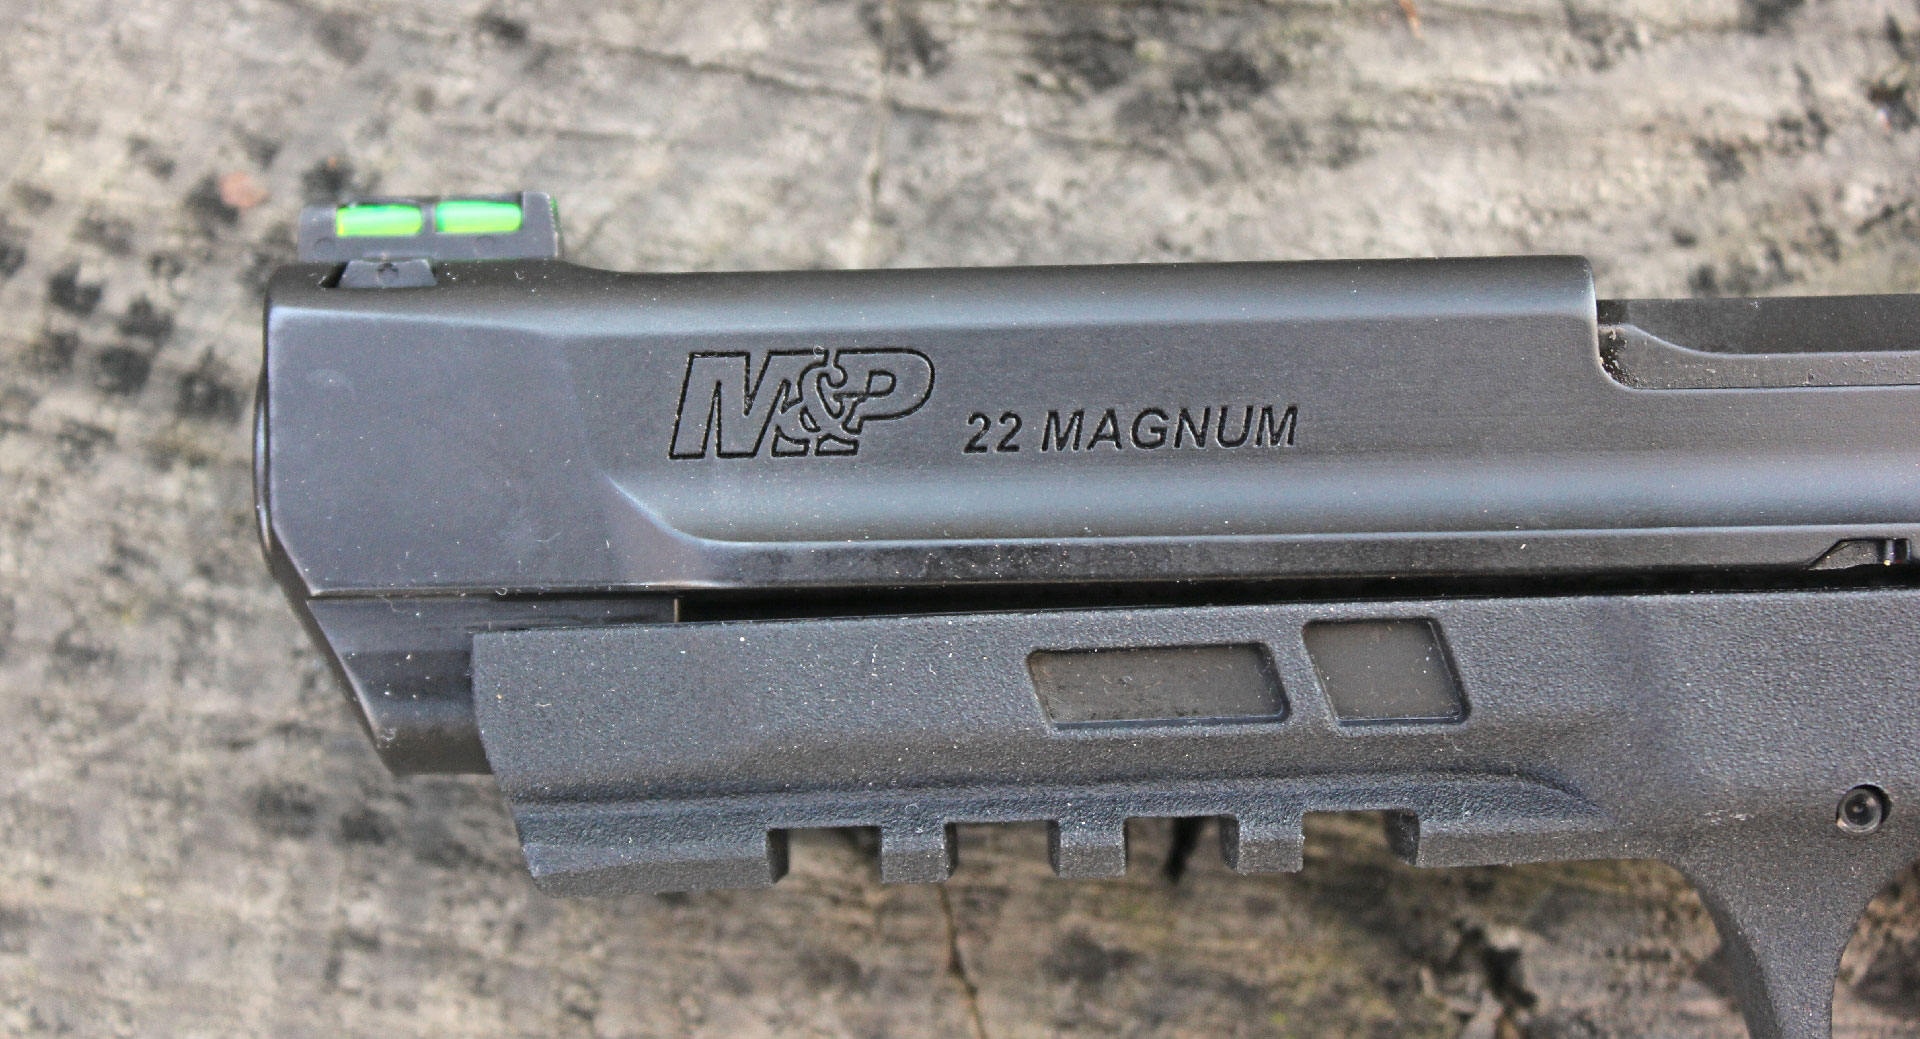 NRA Women  5 Ways the Ruger LCP Max “Fixes” Pocket Pistol Problems